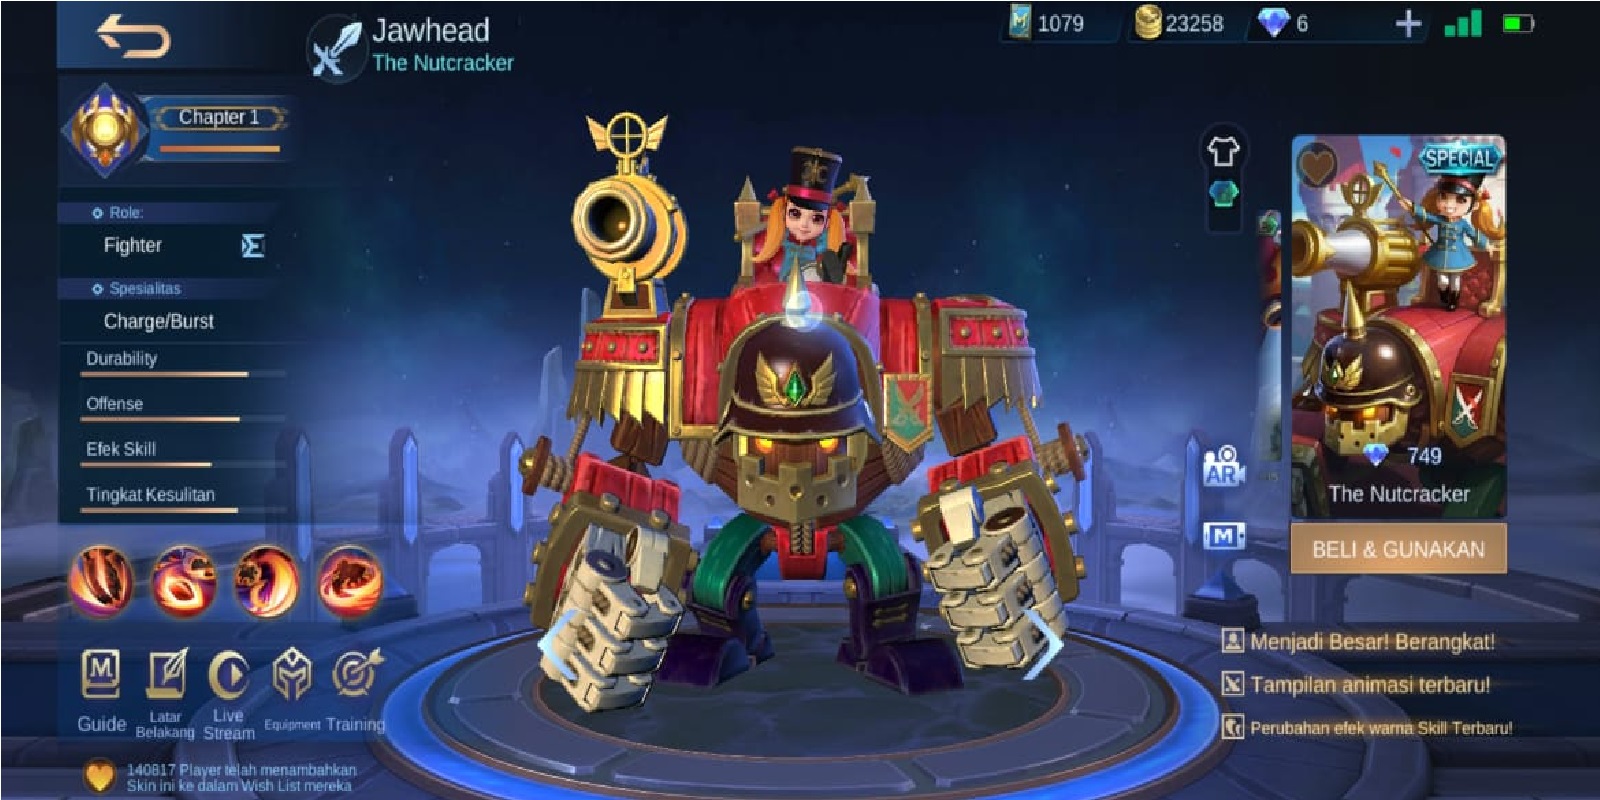 4 Best Skins For Jawhead Mobile Legends Ml Esports